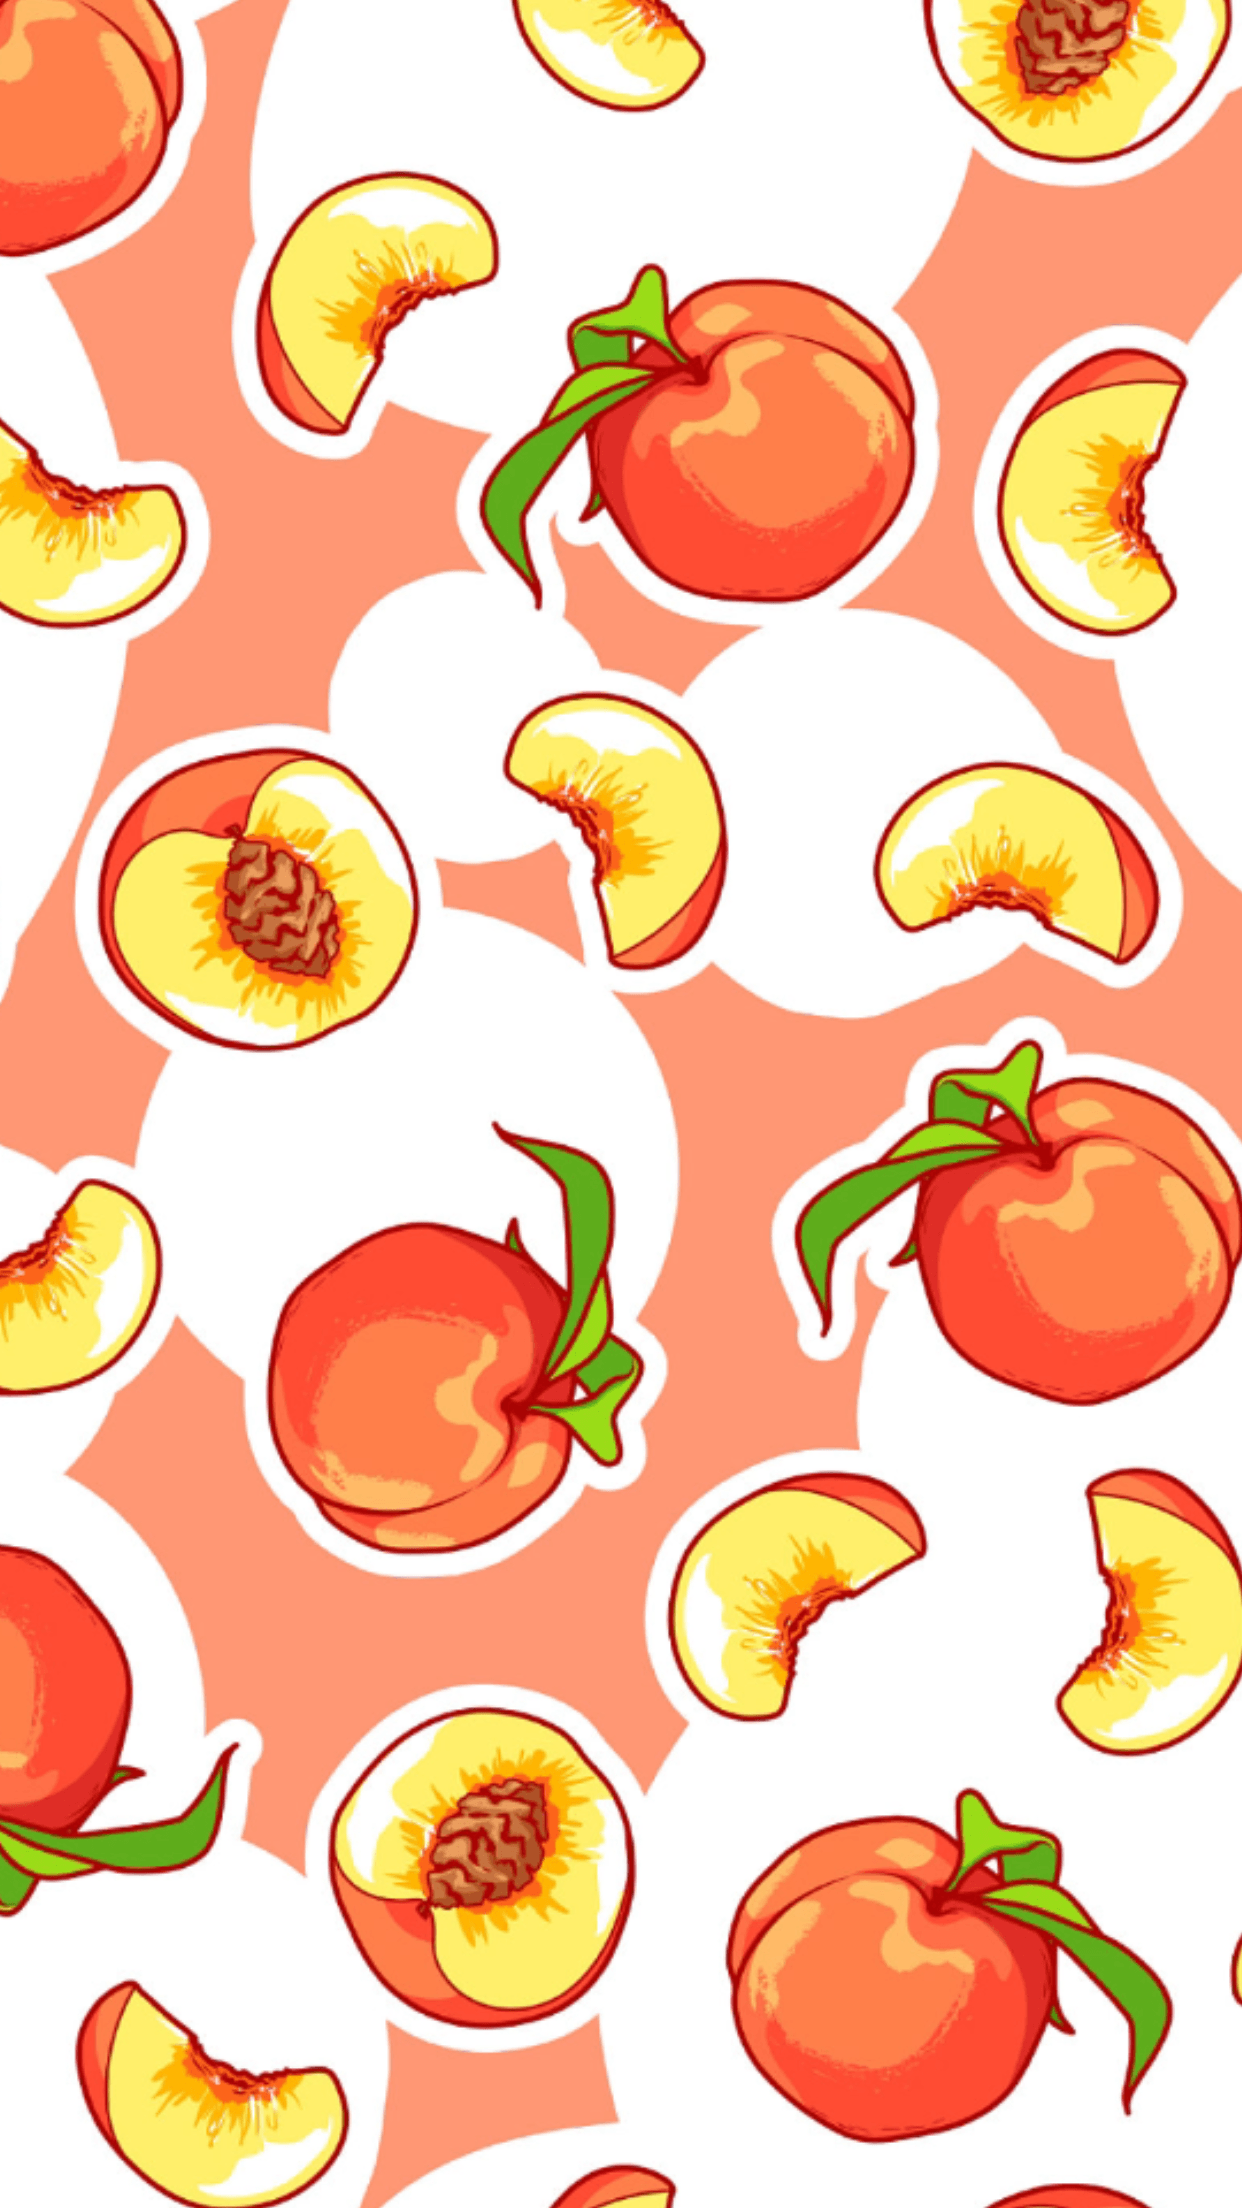 A pattern of peaches and slices - Fruit, food, peach